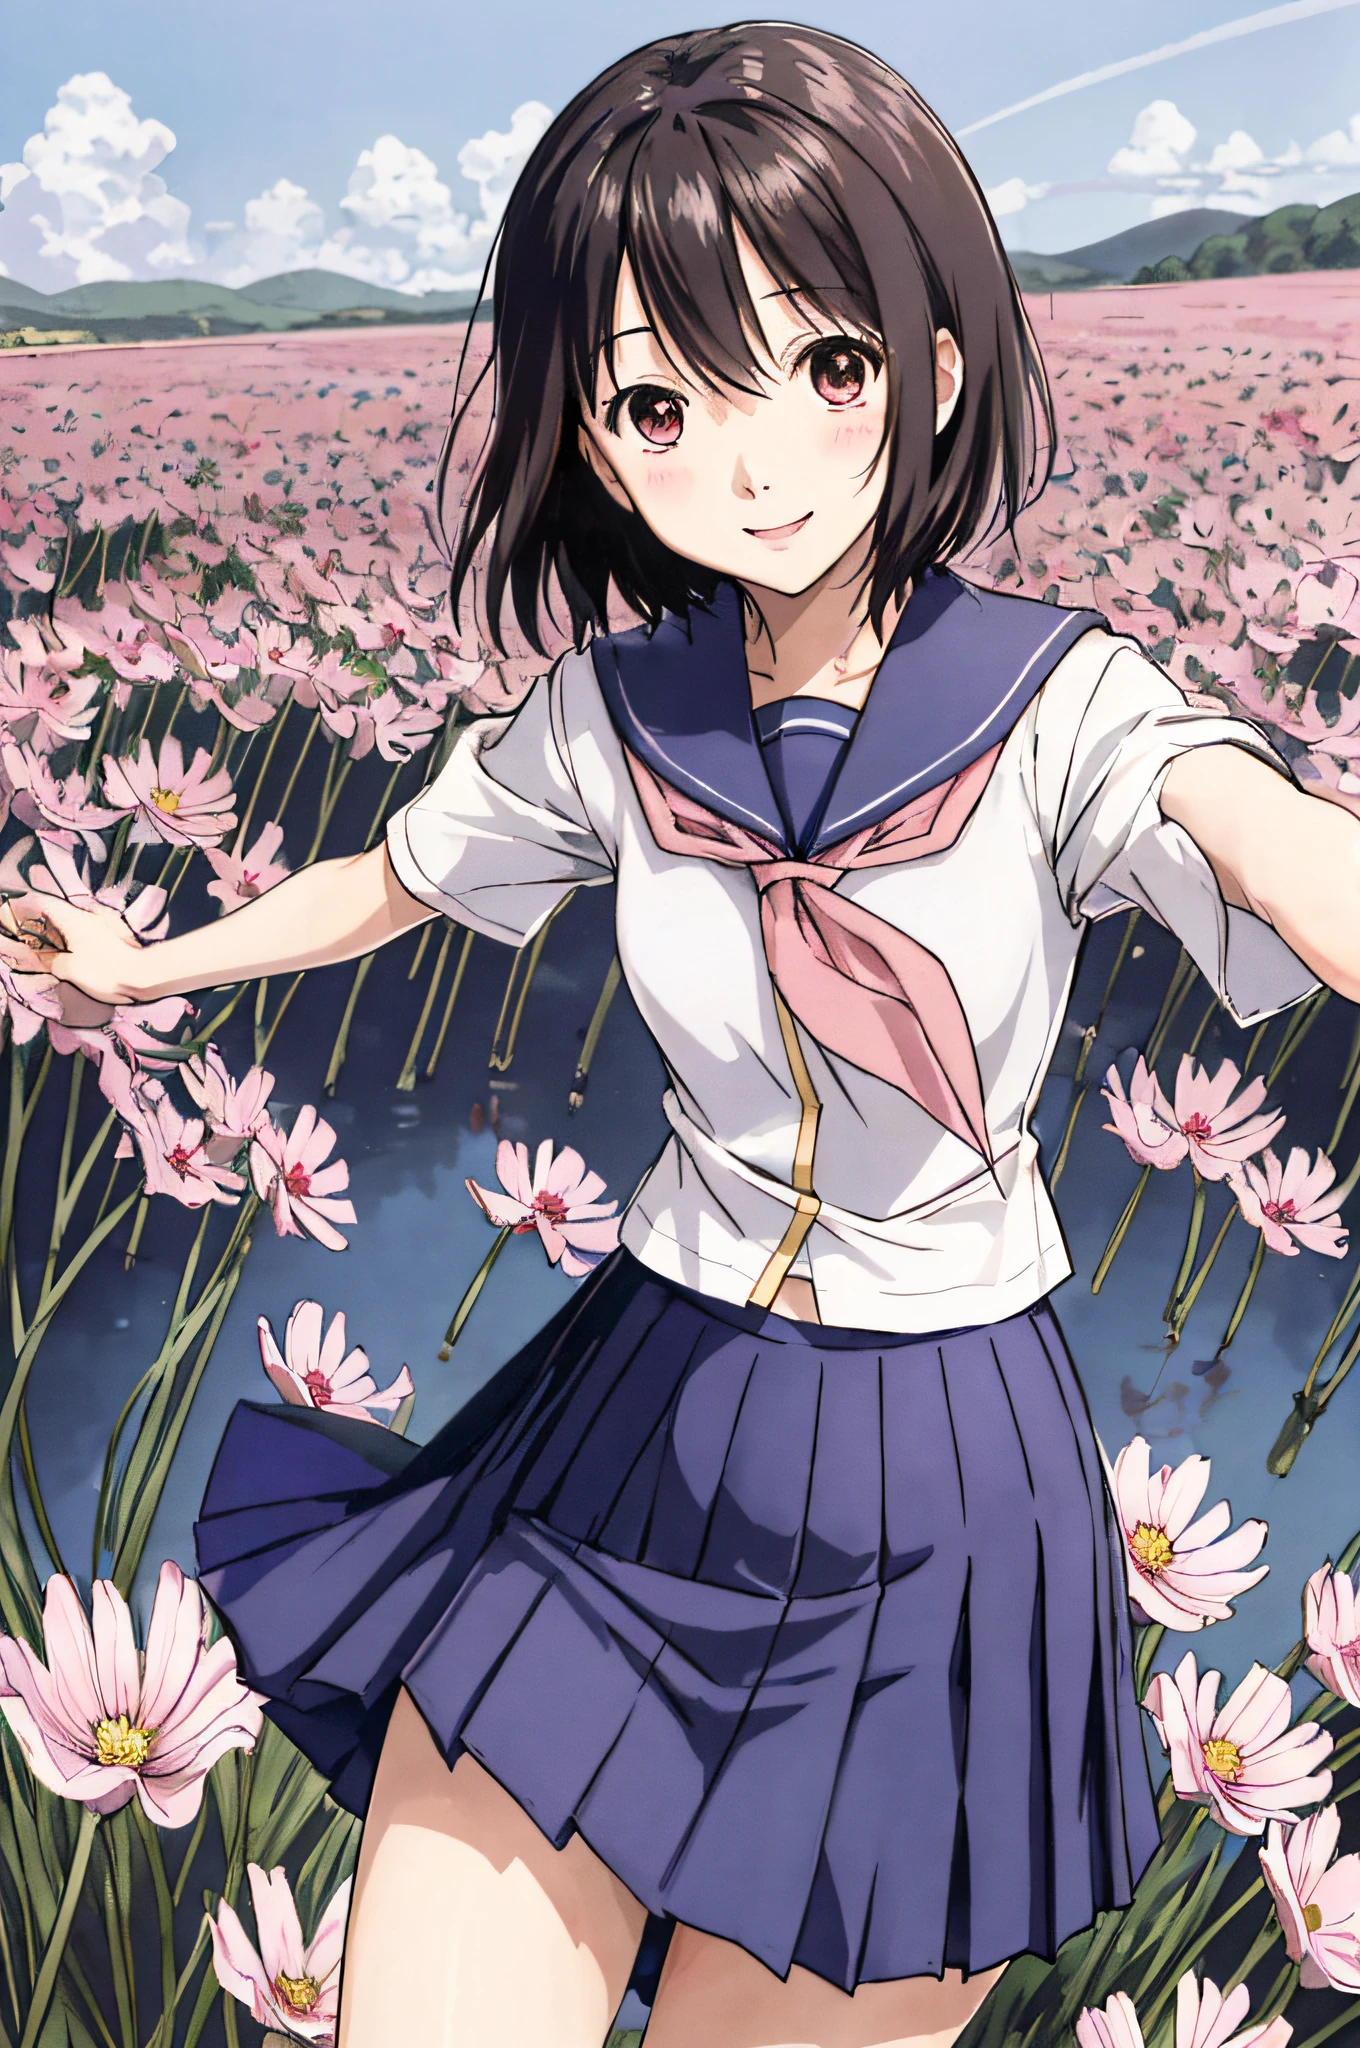 nakahara_misaki、a sailor suit、White blouse、Pink tie、Dark blue pleated skirt、Cosmos Field、、、The best smile、is standing、Panties are visible、Fluttering skirt、a miniskirt、fantastic landscape、strong breeze